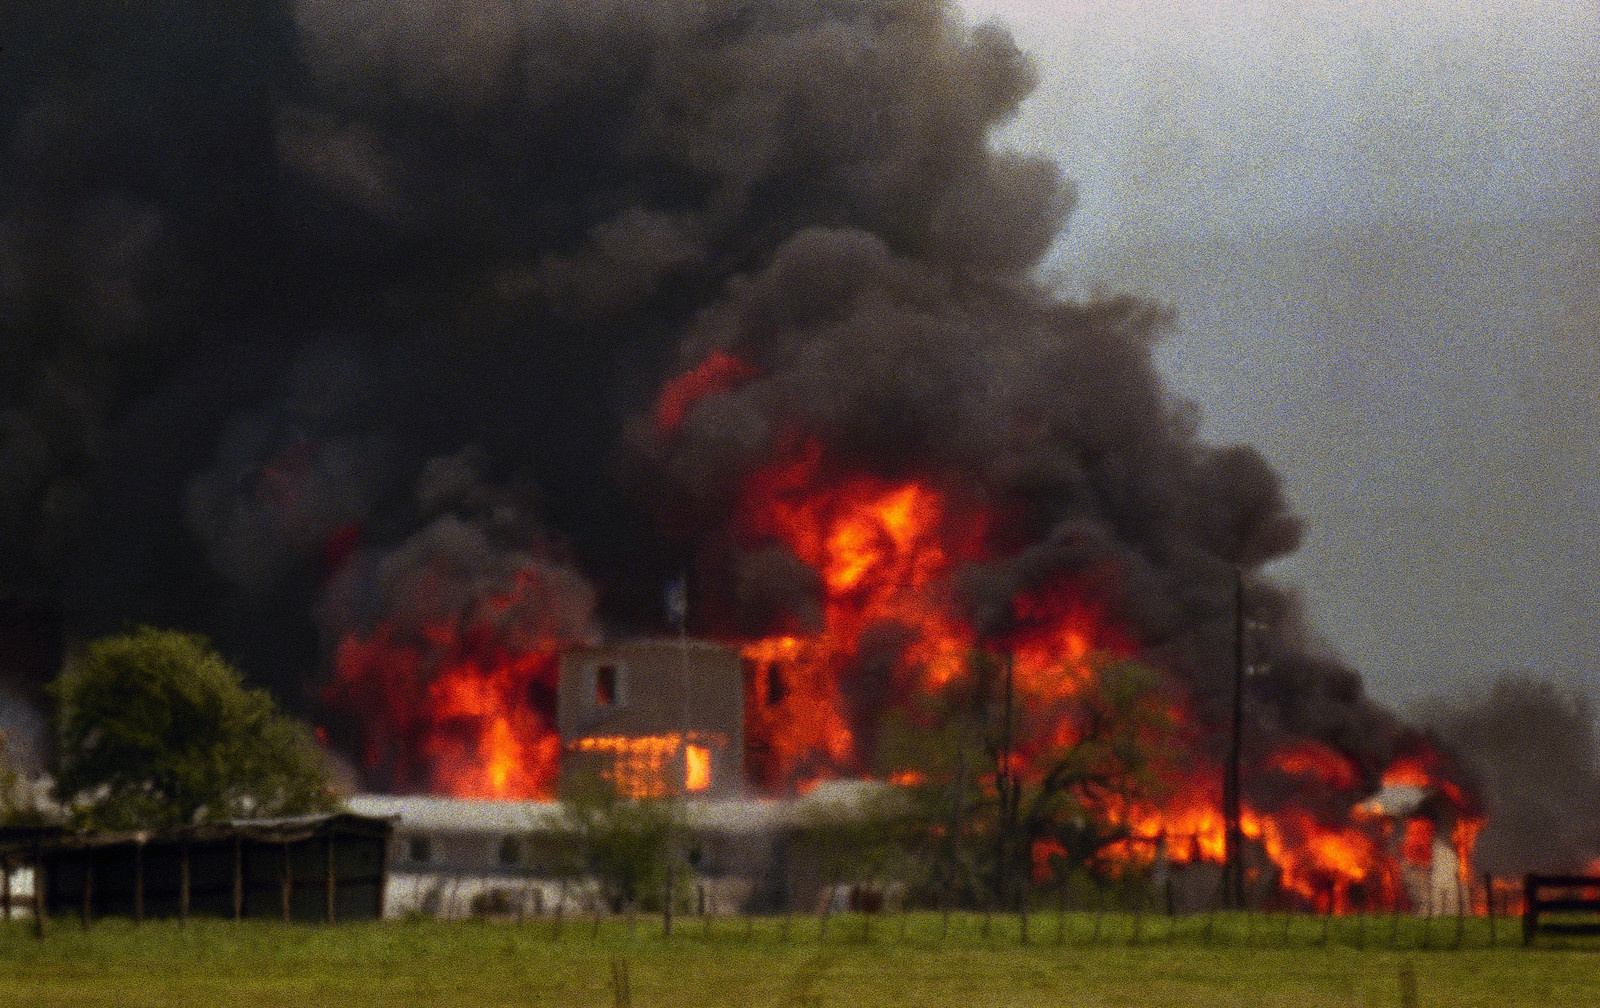 The Waco siege, which ended in flames, was recorded in 1993.

In 1993, the ATF raised the Branch Davidian compound with the purpose of serving arrest and search warrants. The branch was under investigation for illegal possession of firearms and explosives.

The raid escalated into a gun battle, which resulted in the deaths of six Davidians and four government agents. That's when the FBI took over and were challenged by a standoff, one that lasted 51 days.

A controversial fire broke out killing a total of 76 people, including Branch Davidian leader David Koresh.